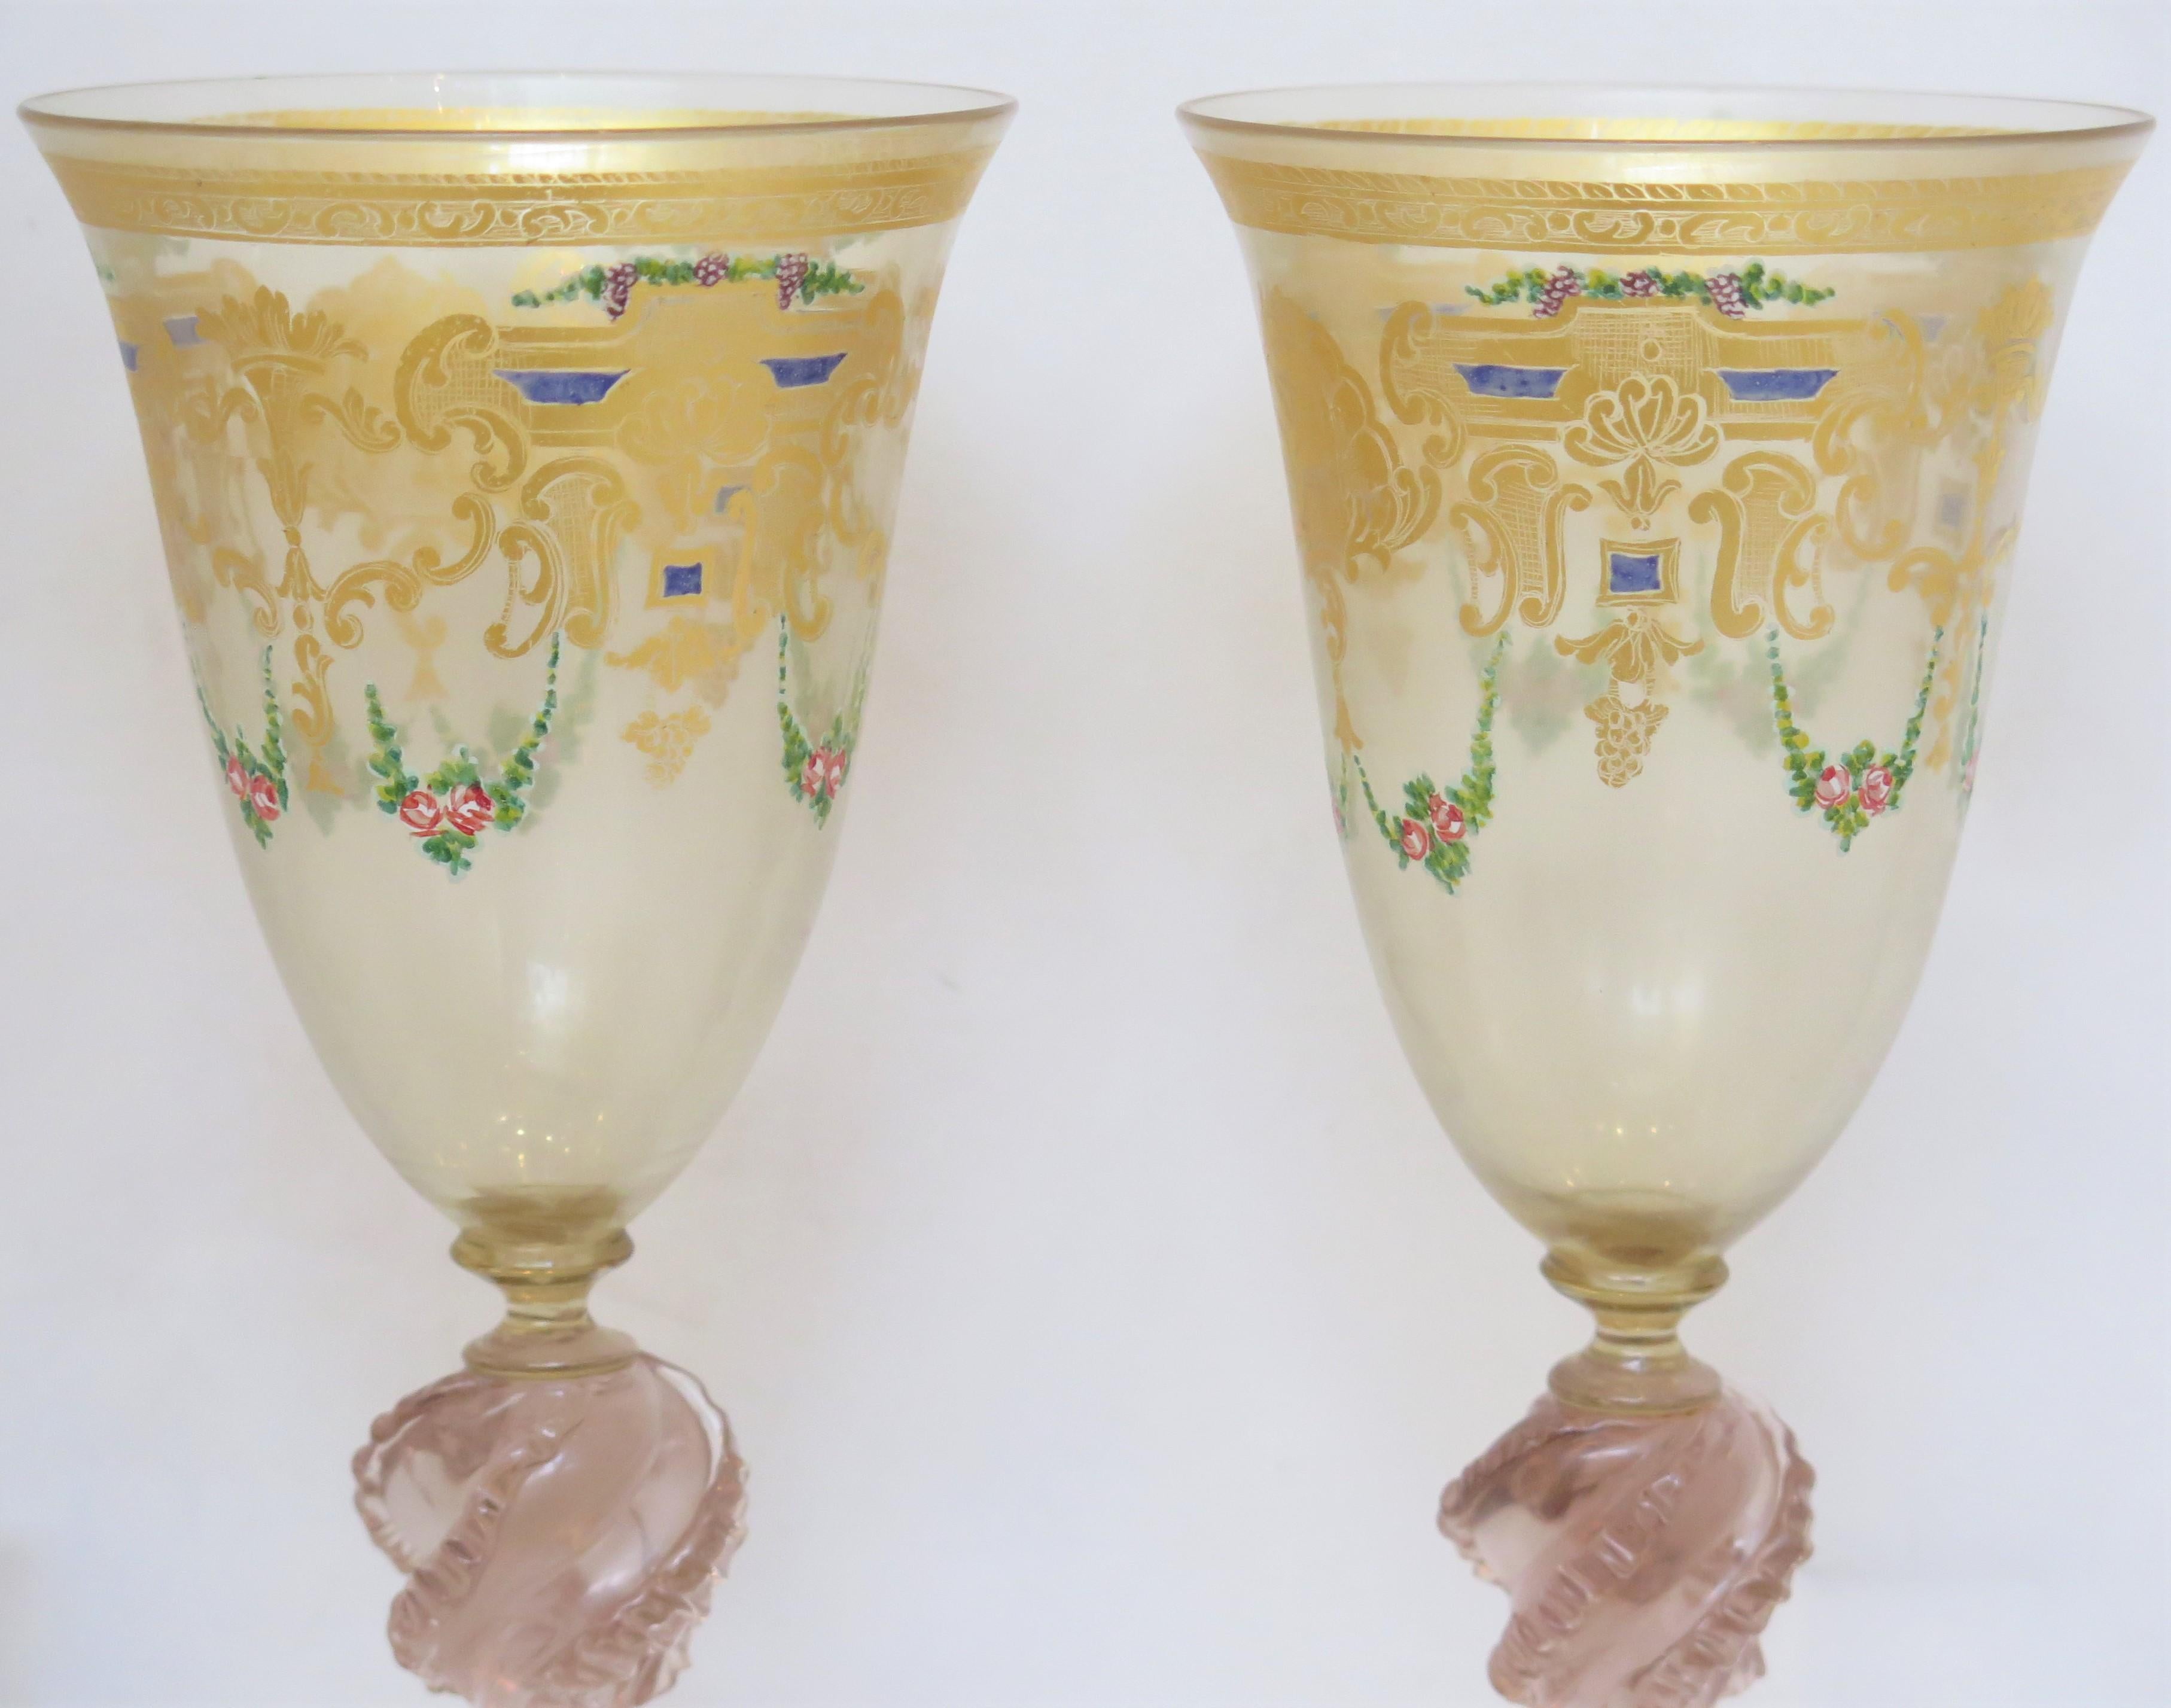 45 Group of Venetian Murano Glass Stemware with Gilt and Hand-Painted Decoration For Sale 2